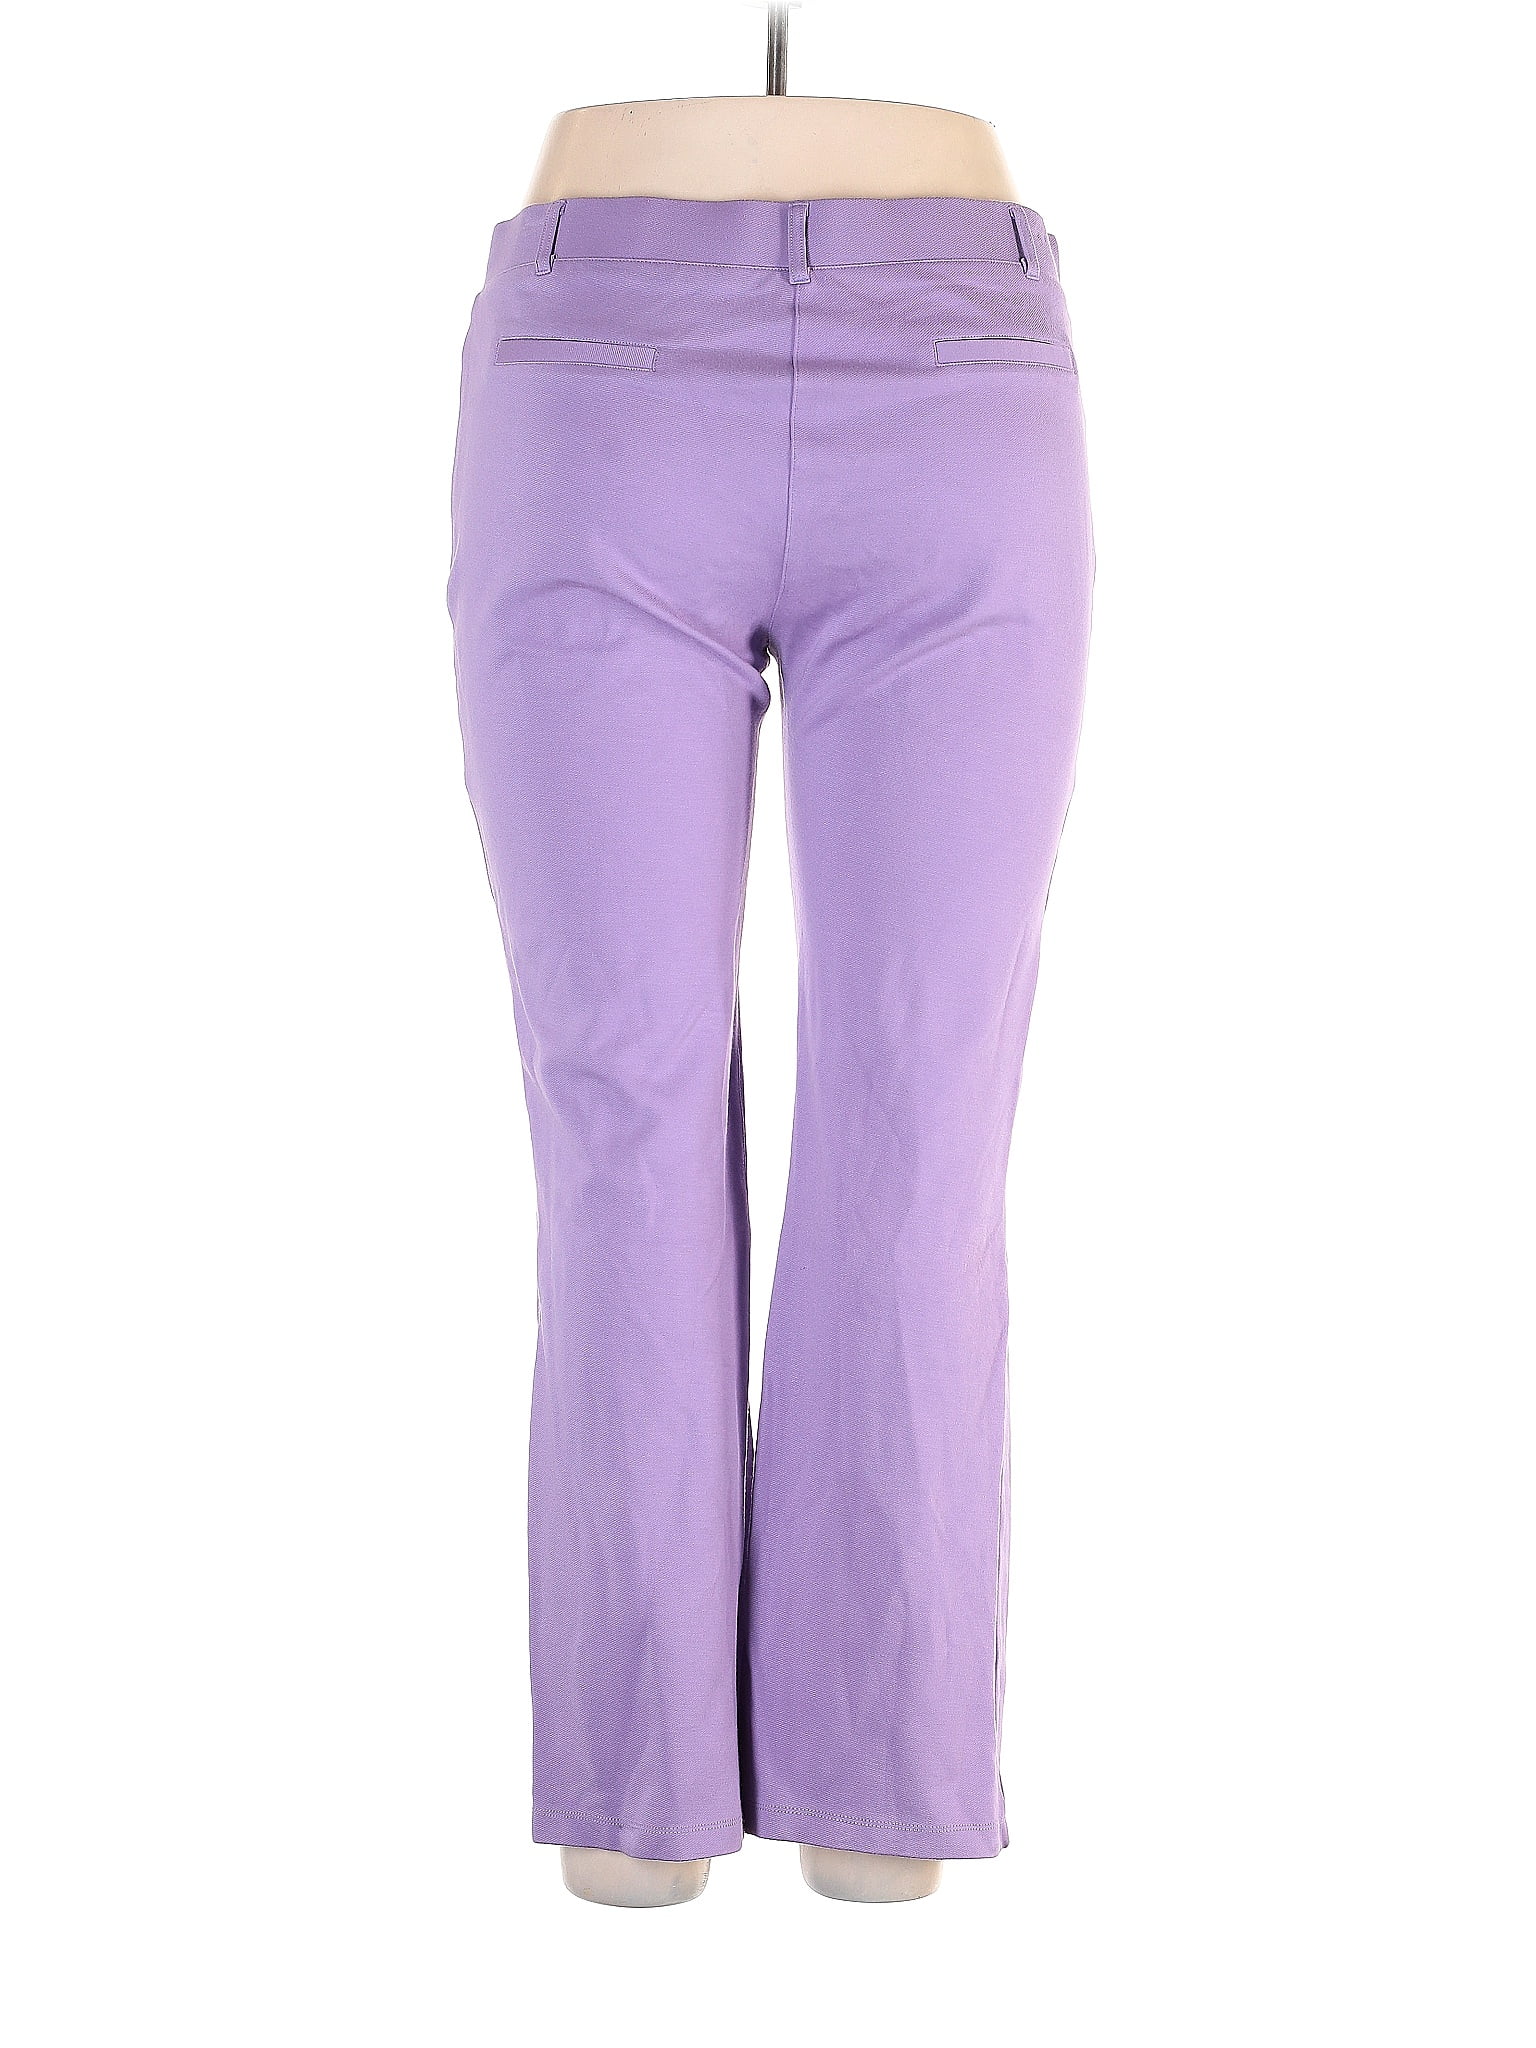 Betabrand Polka Dots Purple Casual Pants Size S (Petite) - 72% off